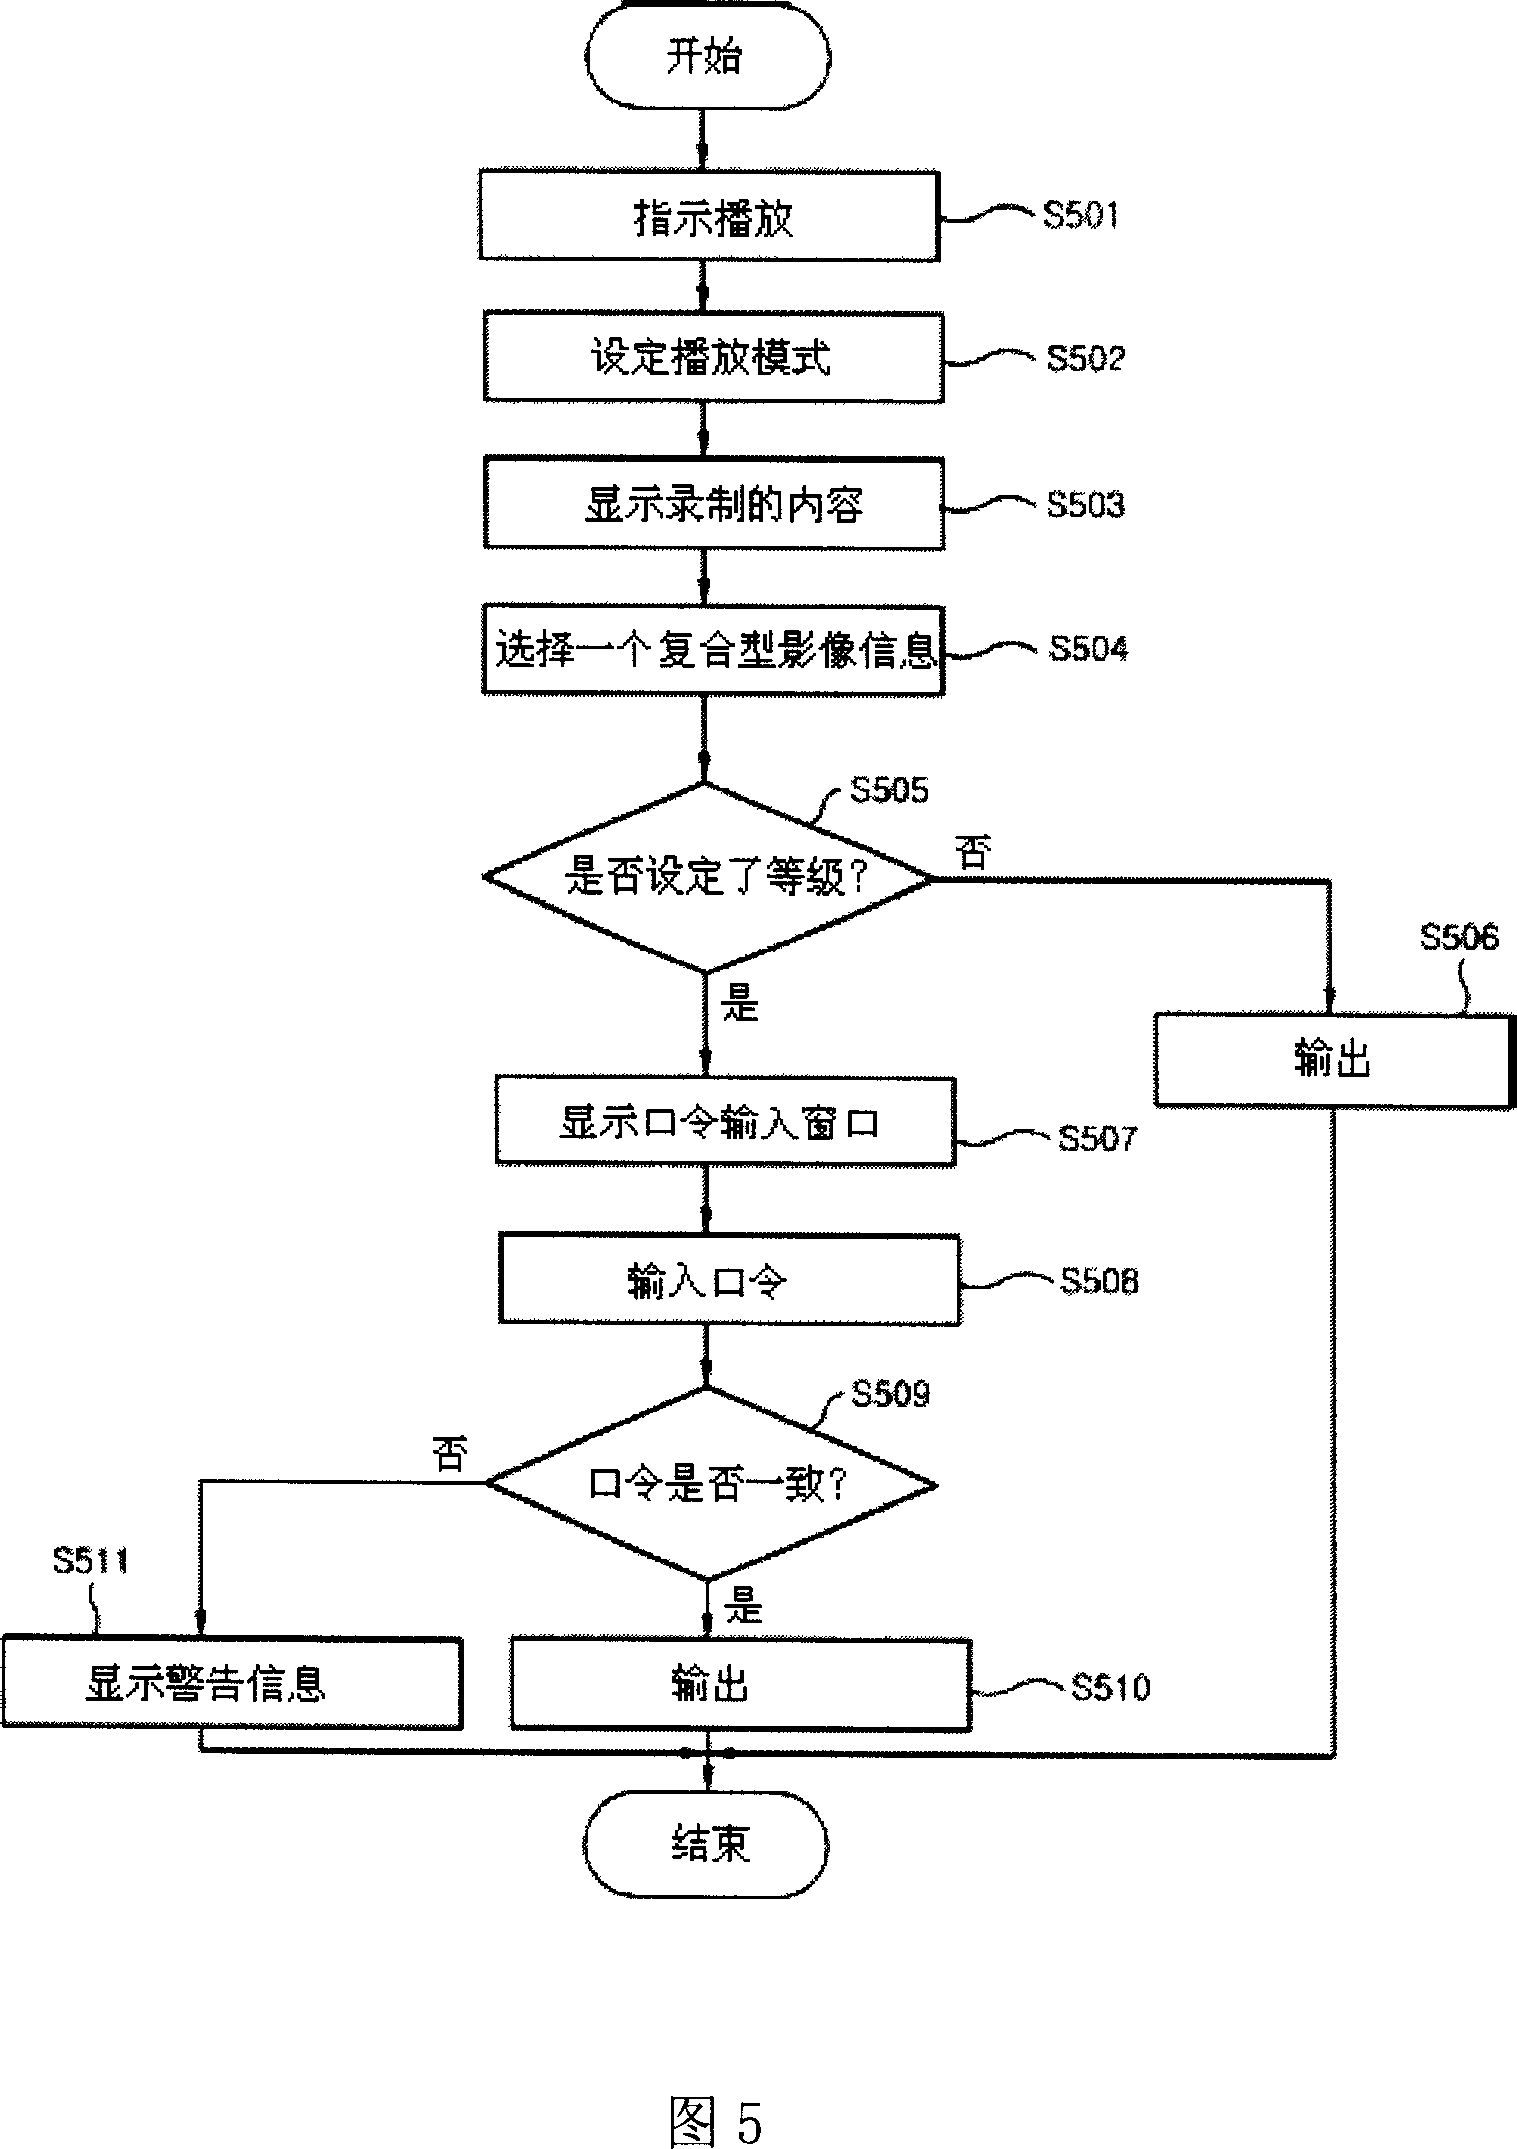 Apparatus for recording and playing composite image information and its method